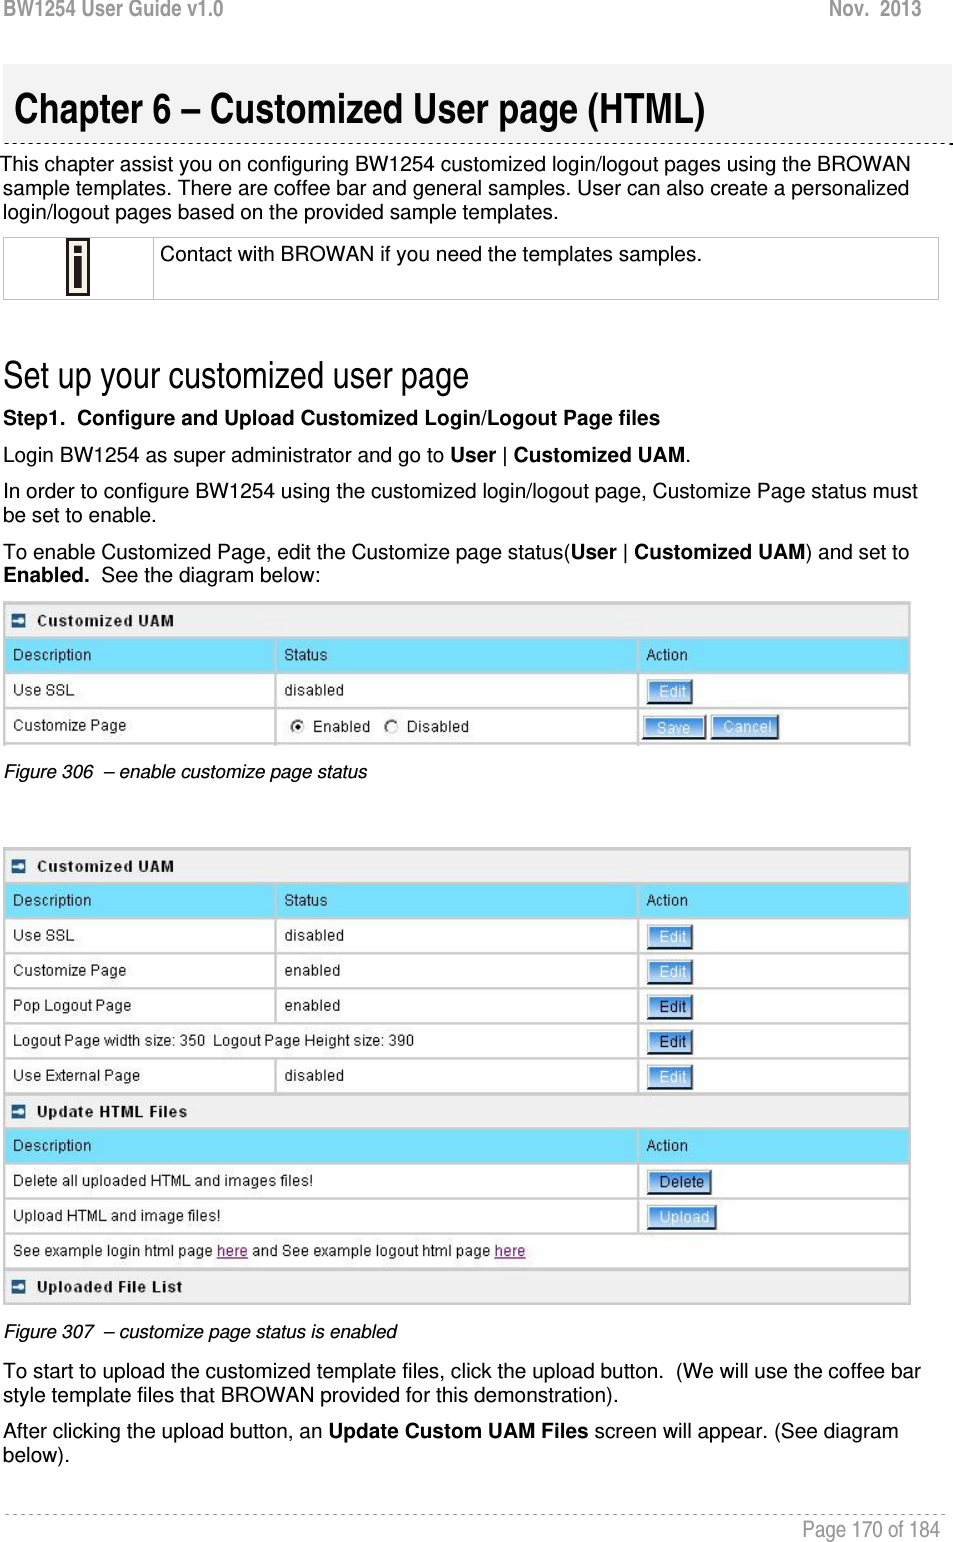 BW1254 User Guide v1.0  Nov.  2013     Page 170 of 184   This chapter assist you on configuring BW1254 customized login/logout pages using the BROWAN sample templates. There are coffee bar and general samples. User can also create a personalized login/logout pages based on the provided sample templates.  Contact with BROWAN if you need the templates samples.  Set up your customized user page Step1.  Configure and Upload Customized Login/Logout Page files Login BW1254 as super administrator and go to User | Customized UAM.   In order to configure BW1254 using the customized login/logout page, Customize Page status must be set to enable. To enable Customized Page, edit the Customize page status(User | Customized UAM) and set to Enabled.  See the diagram below:  Figure 306  – enable customize page status     Figure 307  – customize page status is enabled  To start to upload the customized template files, click the upload button.  (We will use the coffee bar style template files that BROWAN provided for this demonstration). After clicking the upload button, an Update Custom UAM Files screen will appear. (See diagram below).   Chapter 6 – Customized User page (HTML) 